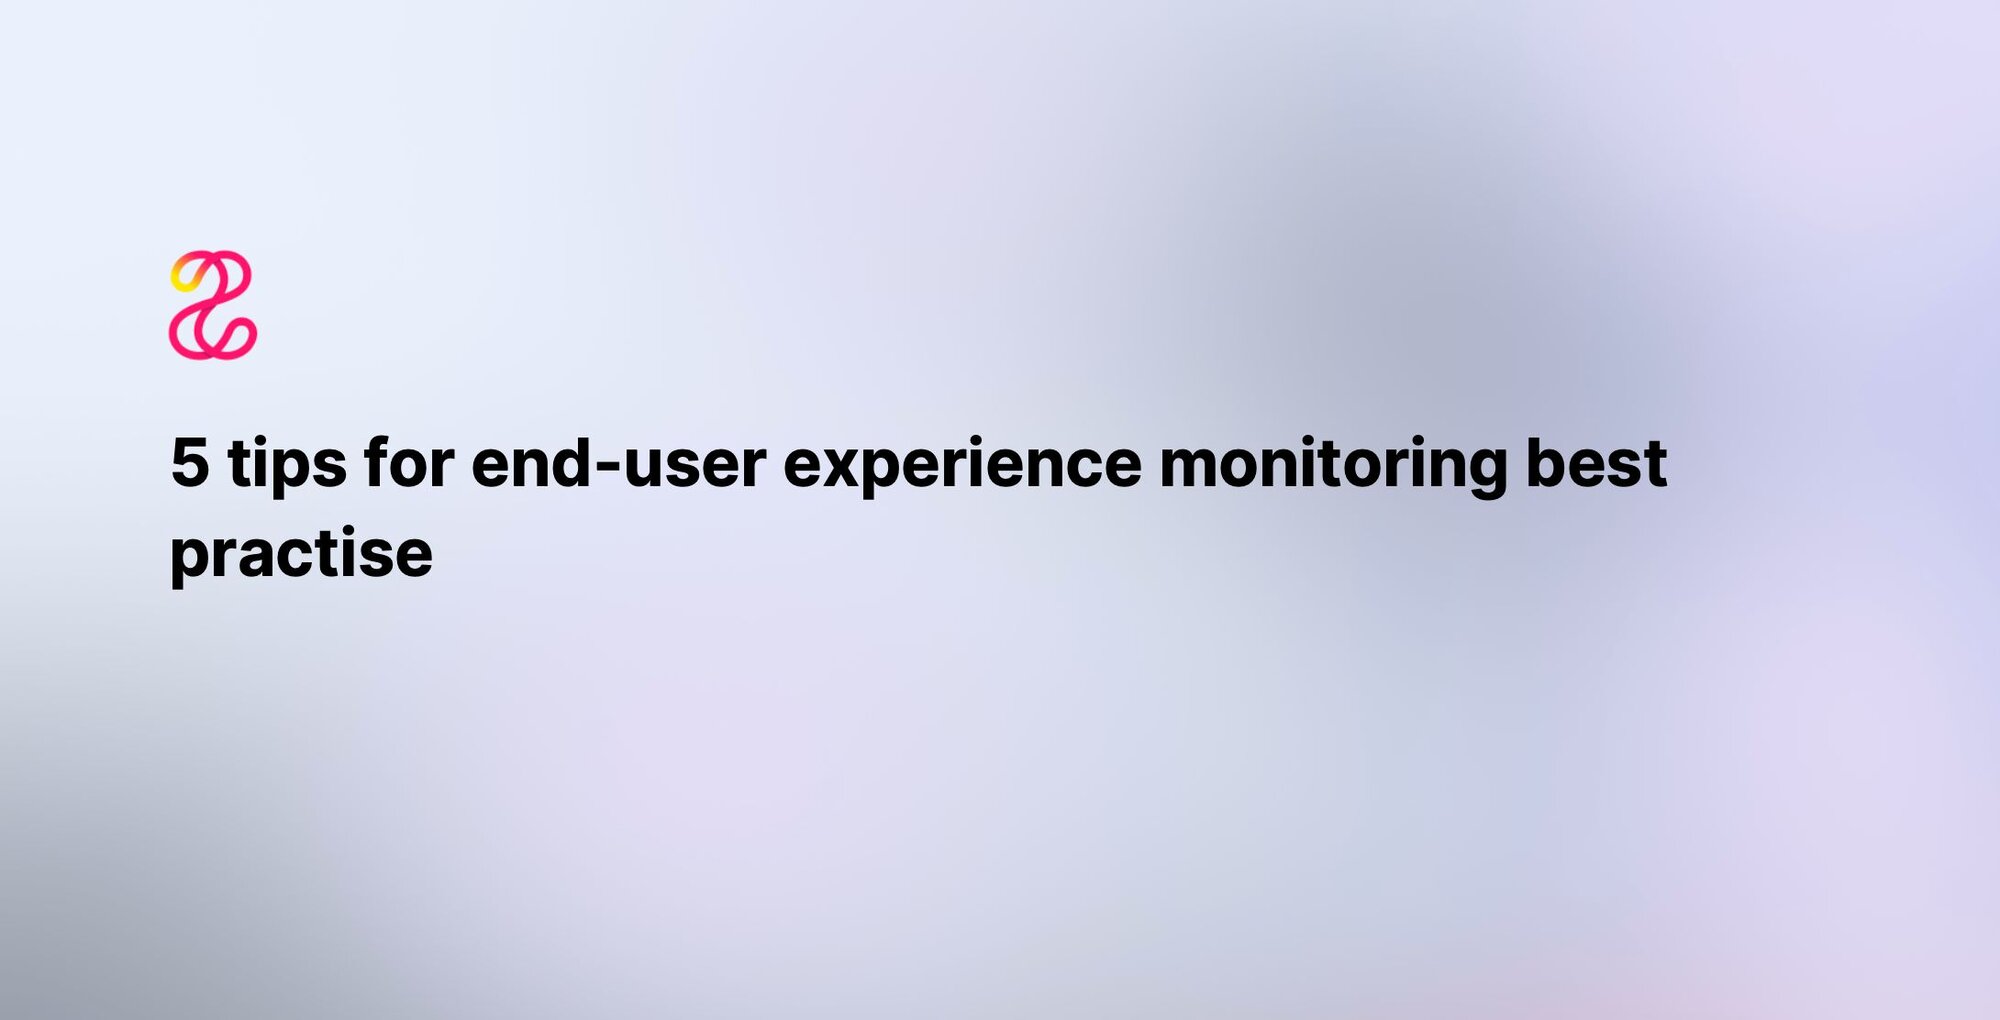 5 tips for end-user experience monitoring best practise